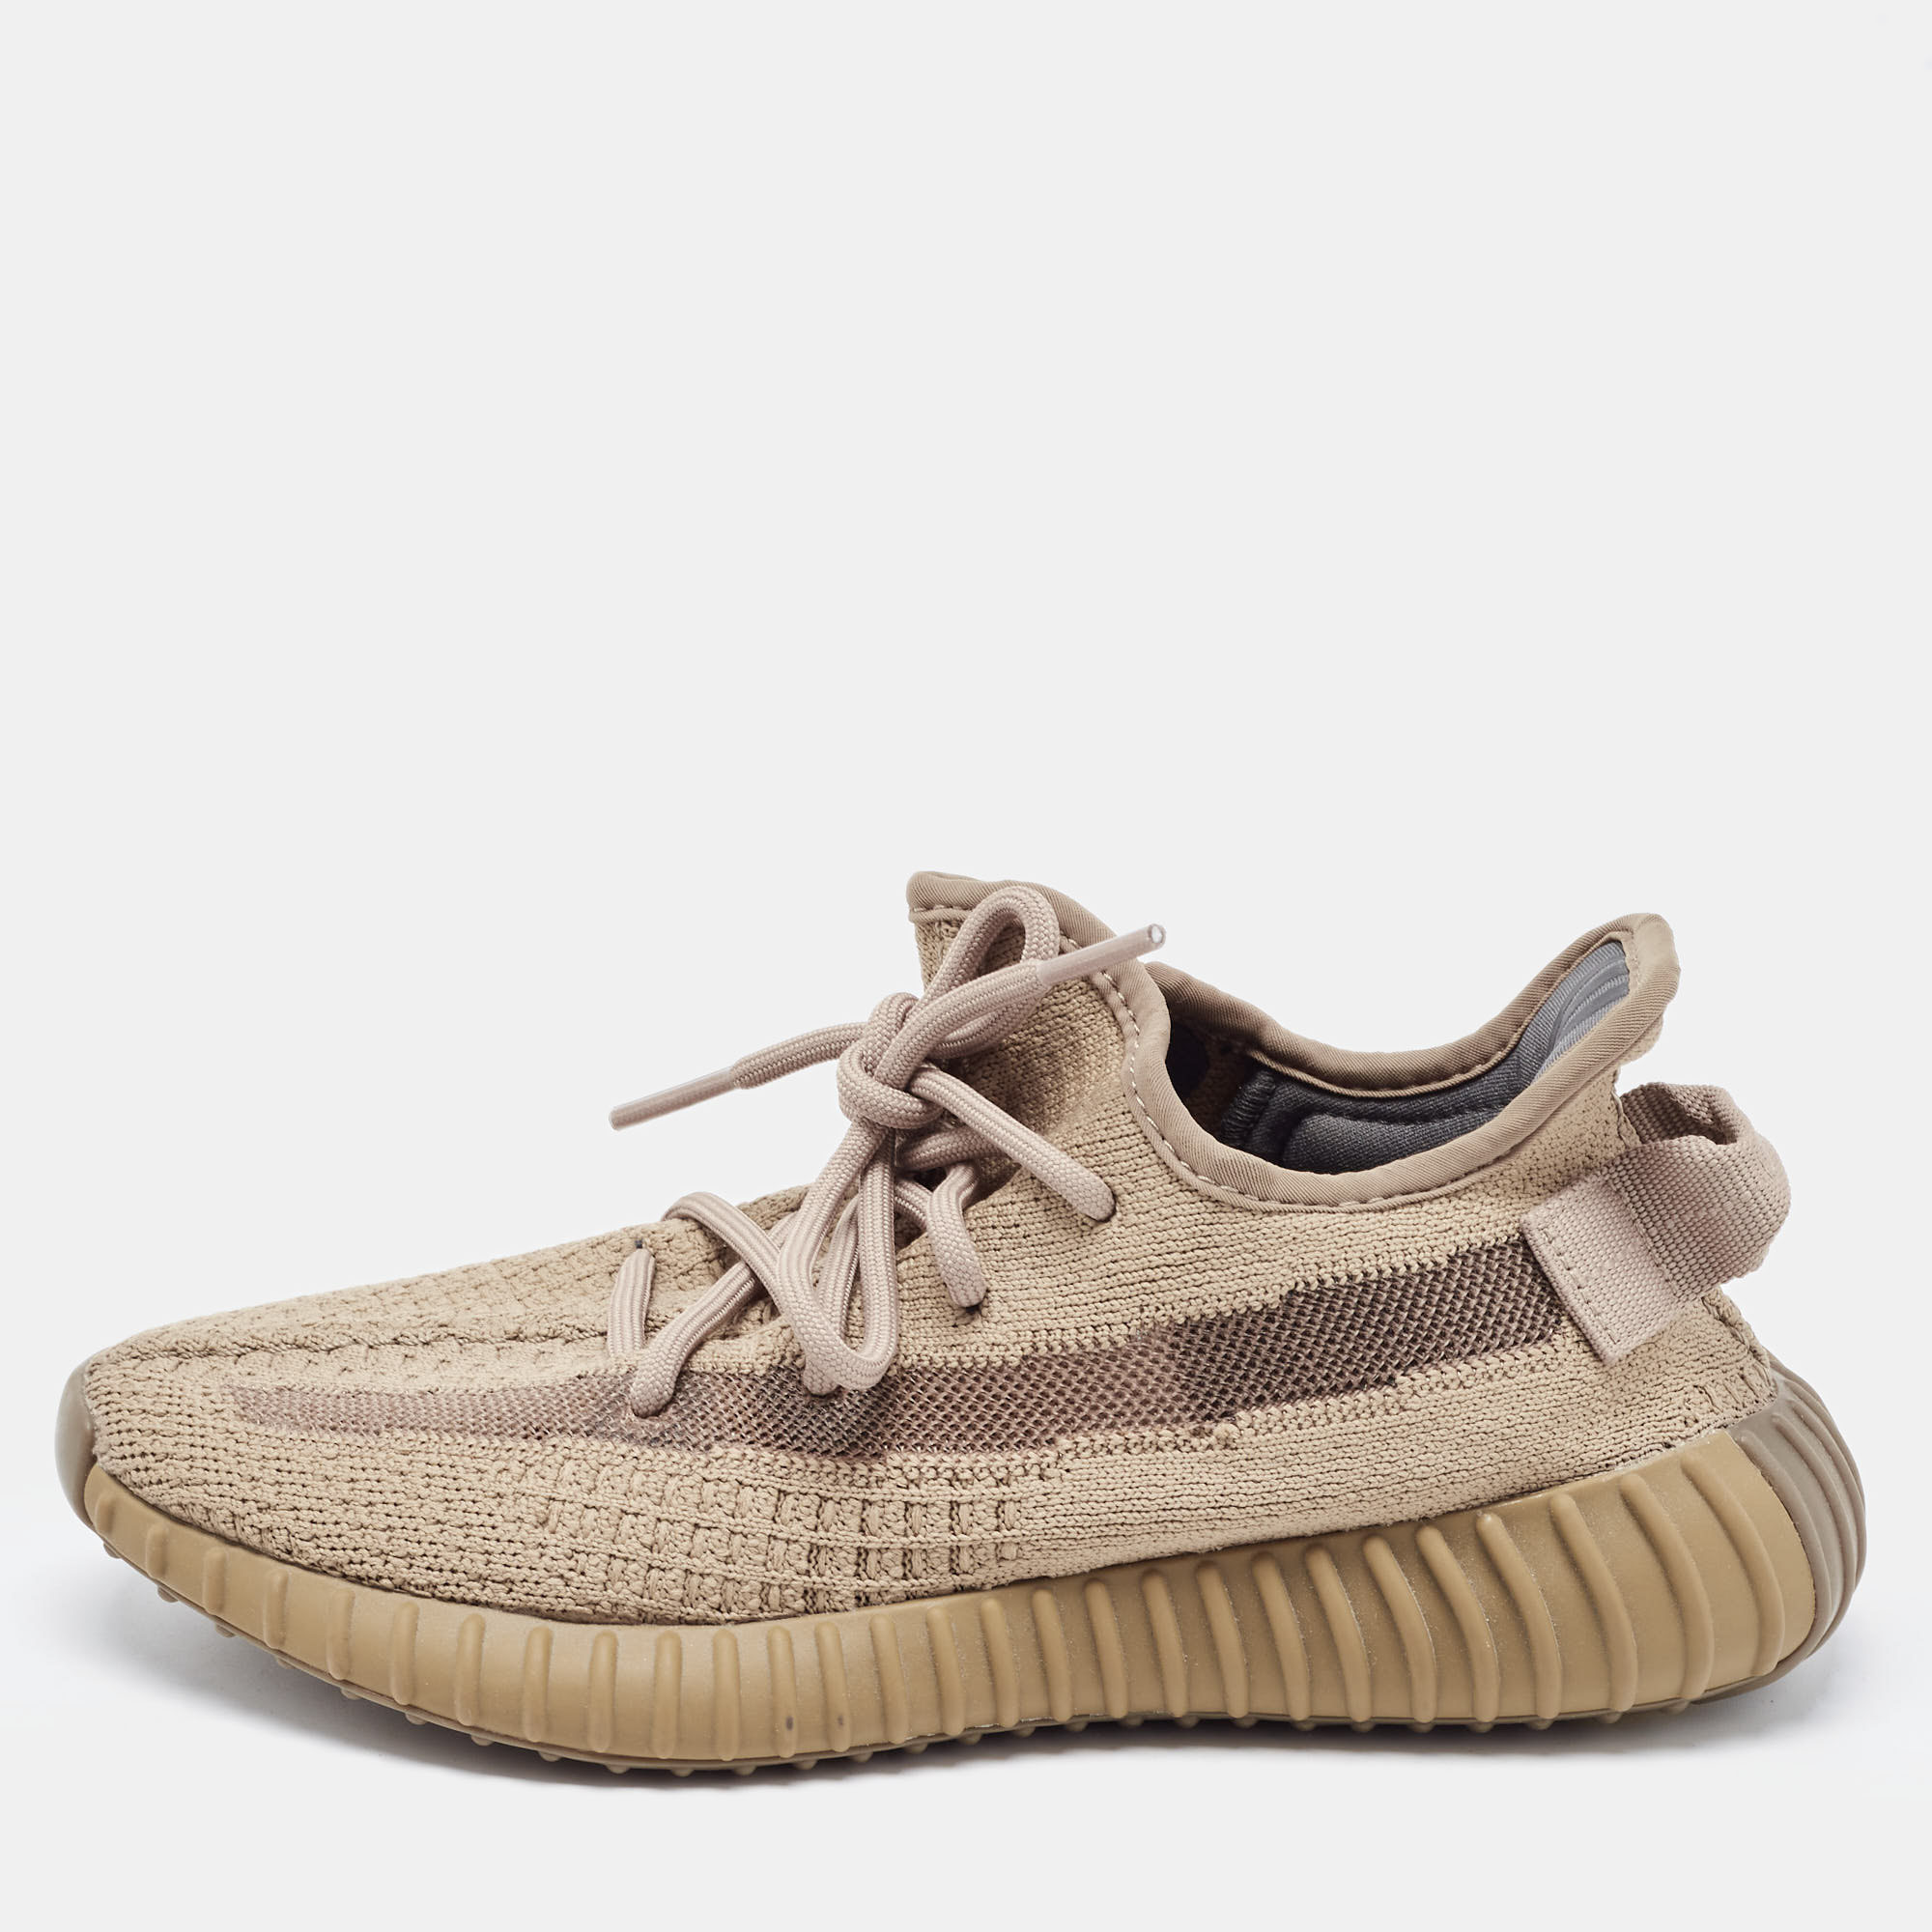 

Yeezy x Adidas Brown Knit Fabric Boost 350 V2 Earth Sneakers Size